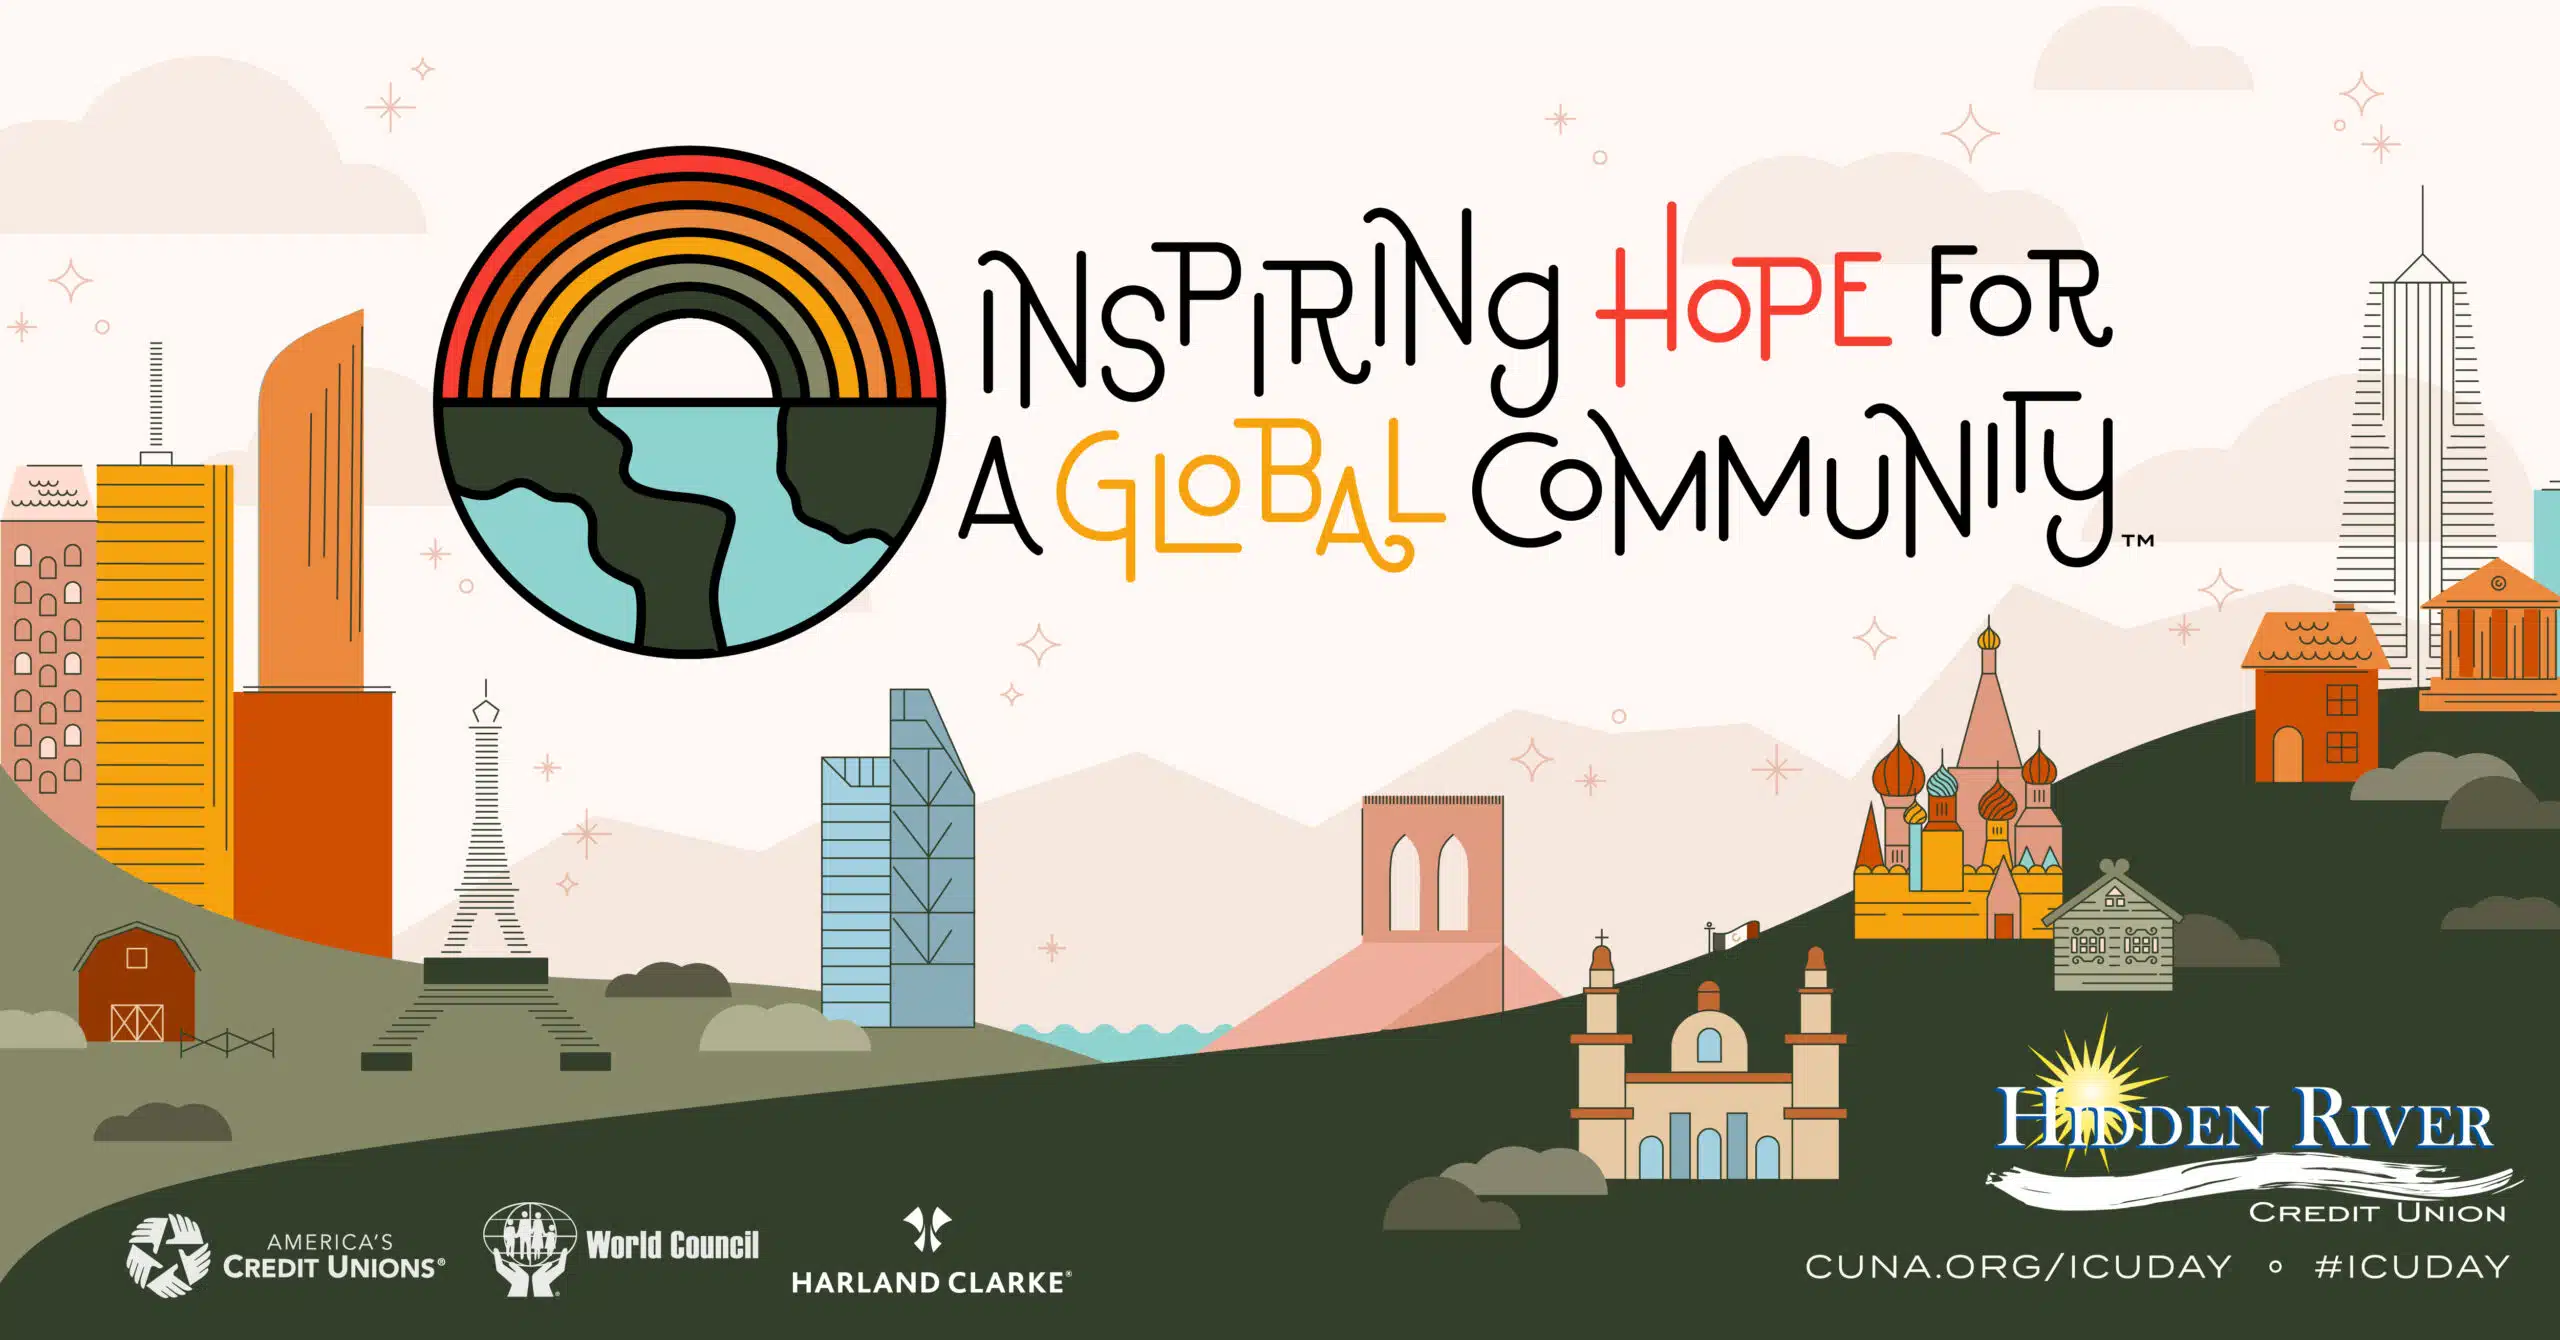 Vector style city landscape with hills and buildings. Includes text Inspiring Hope for a Global Community